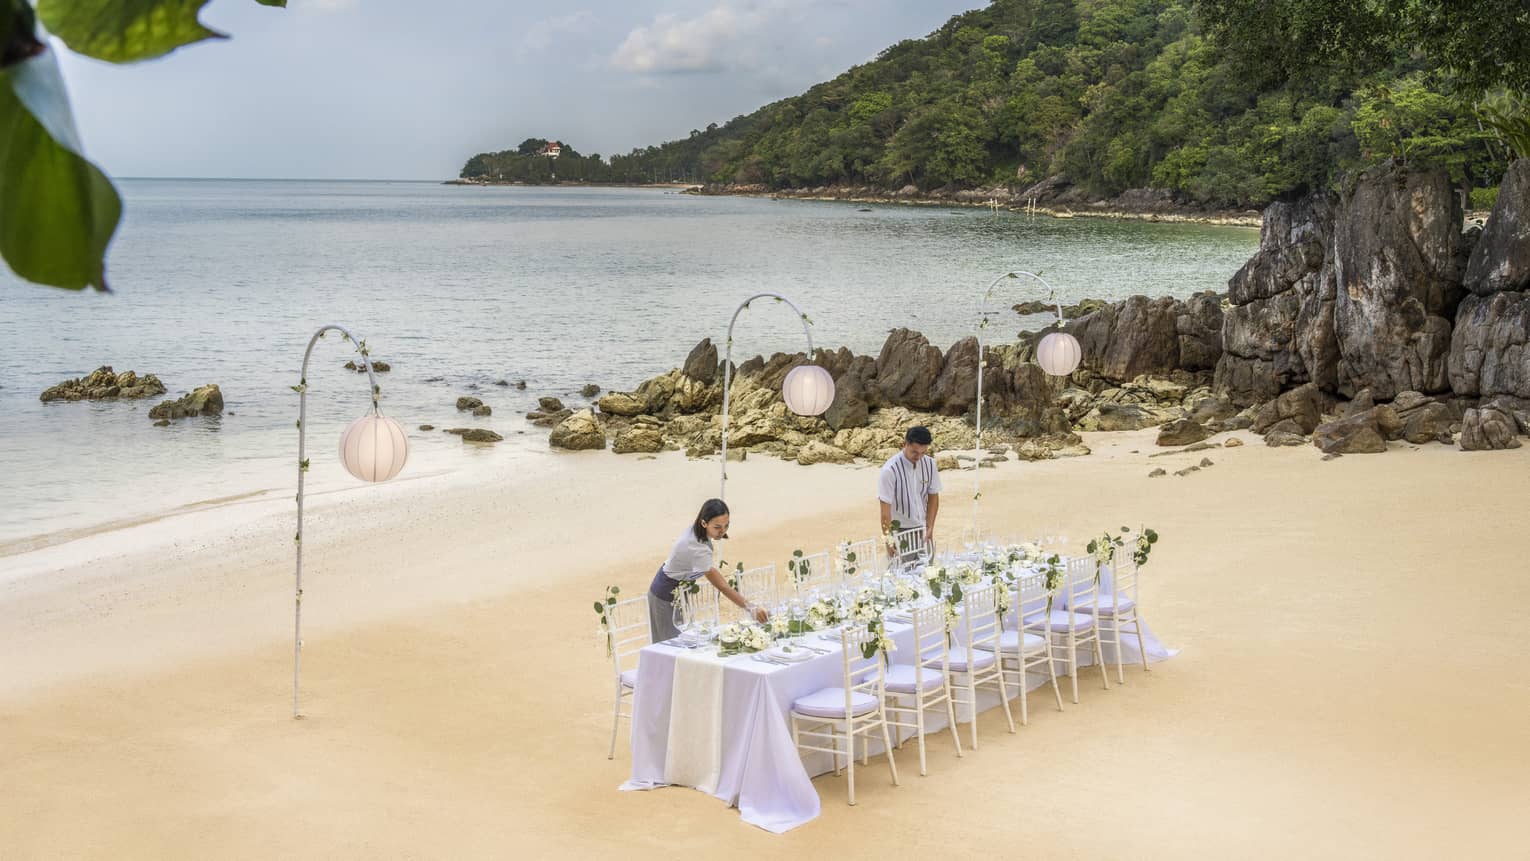 Team members set up a reception table on the beach